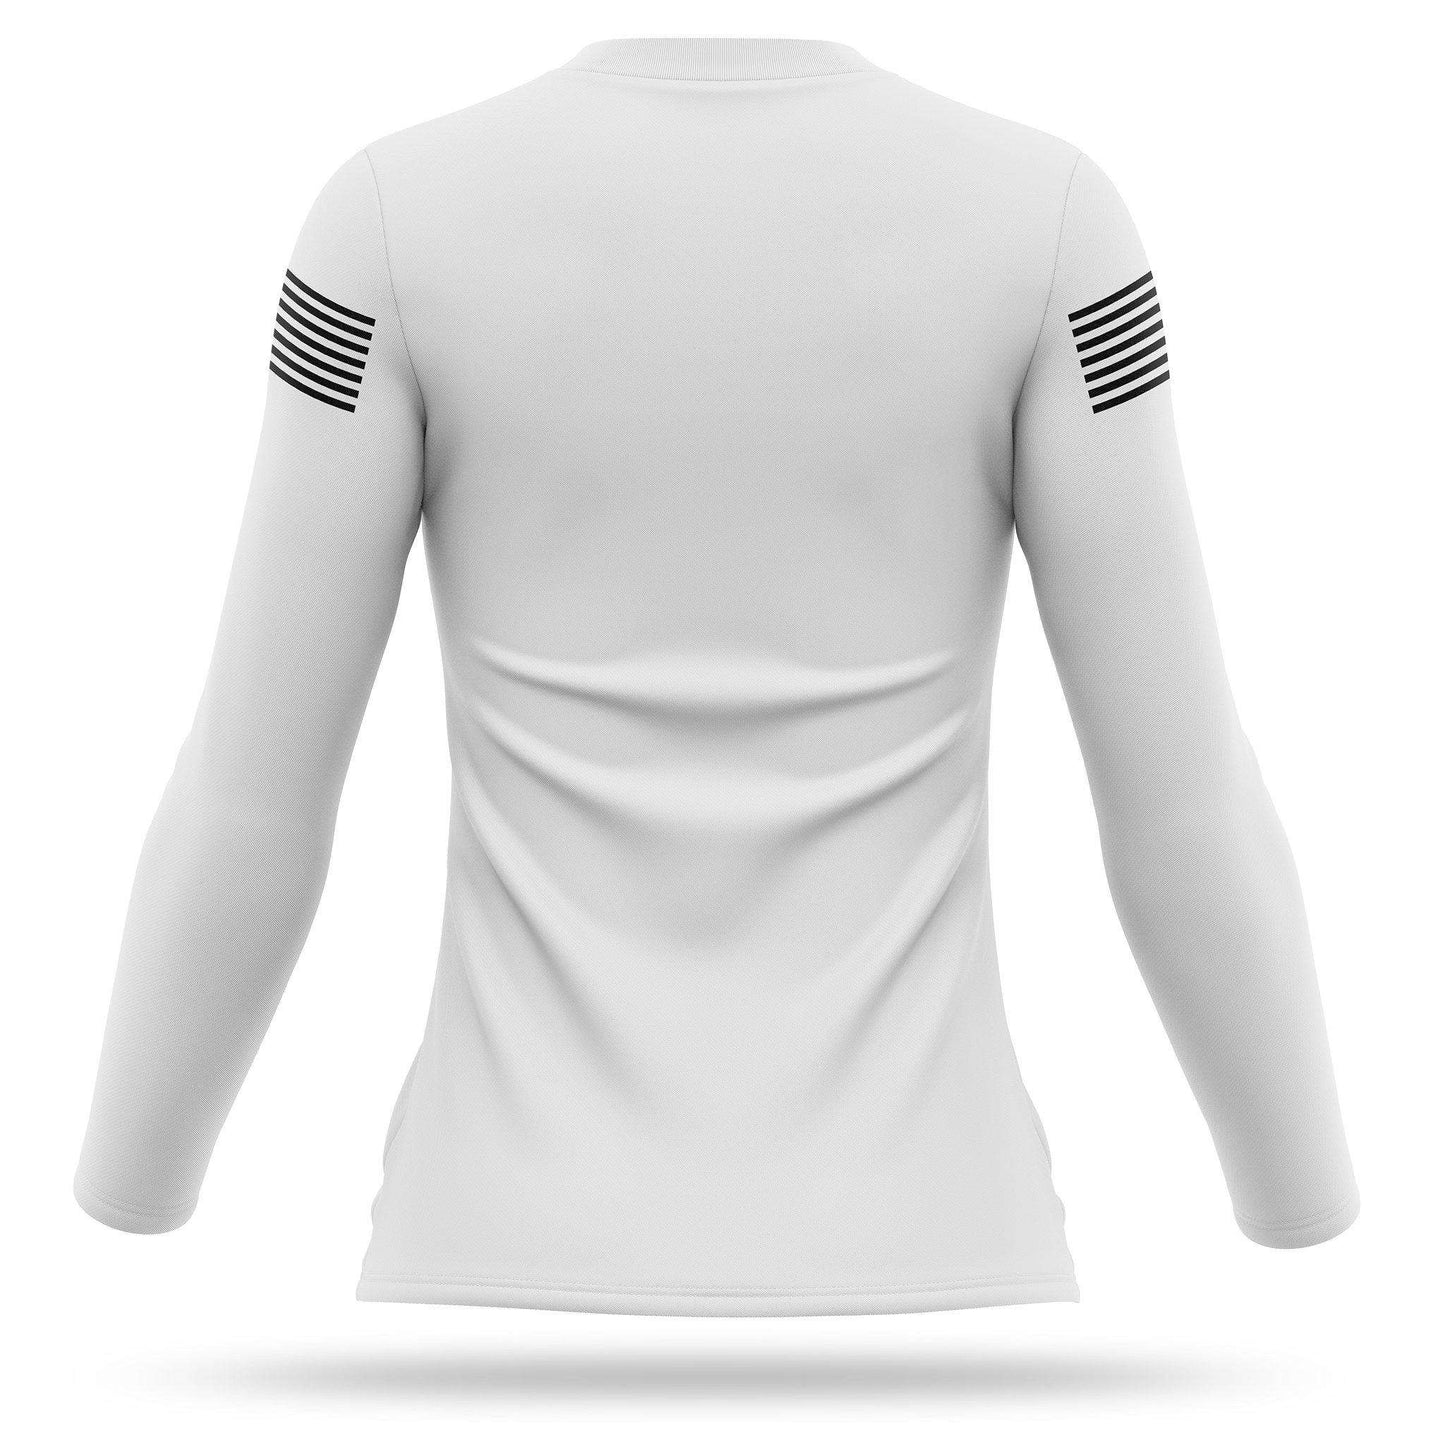 [PATRIOT] Women's Performance Long Sleeve [WHT/BLK]-13 Fifty Apparel